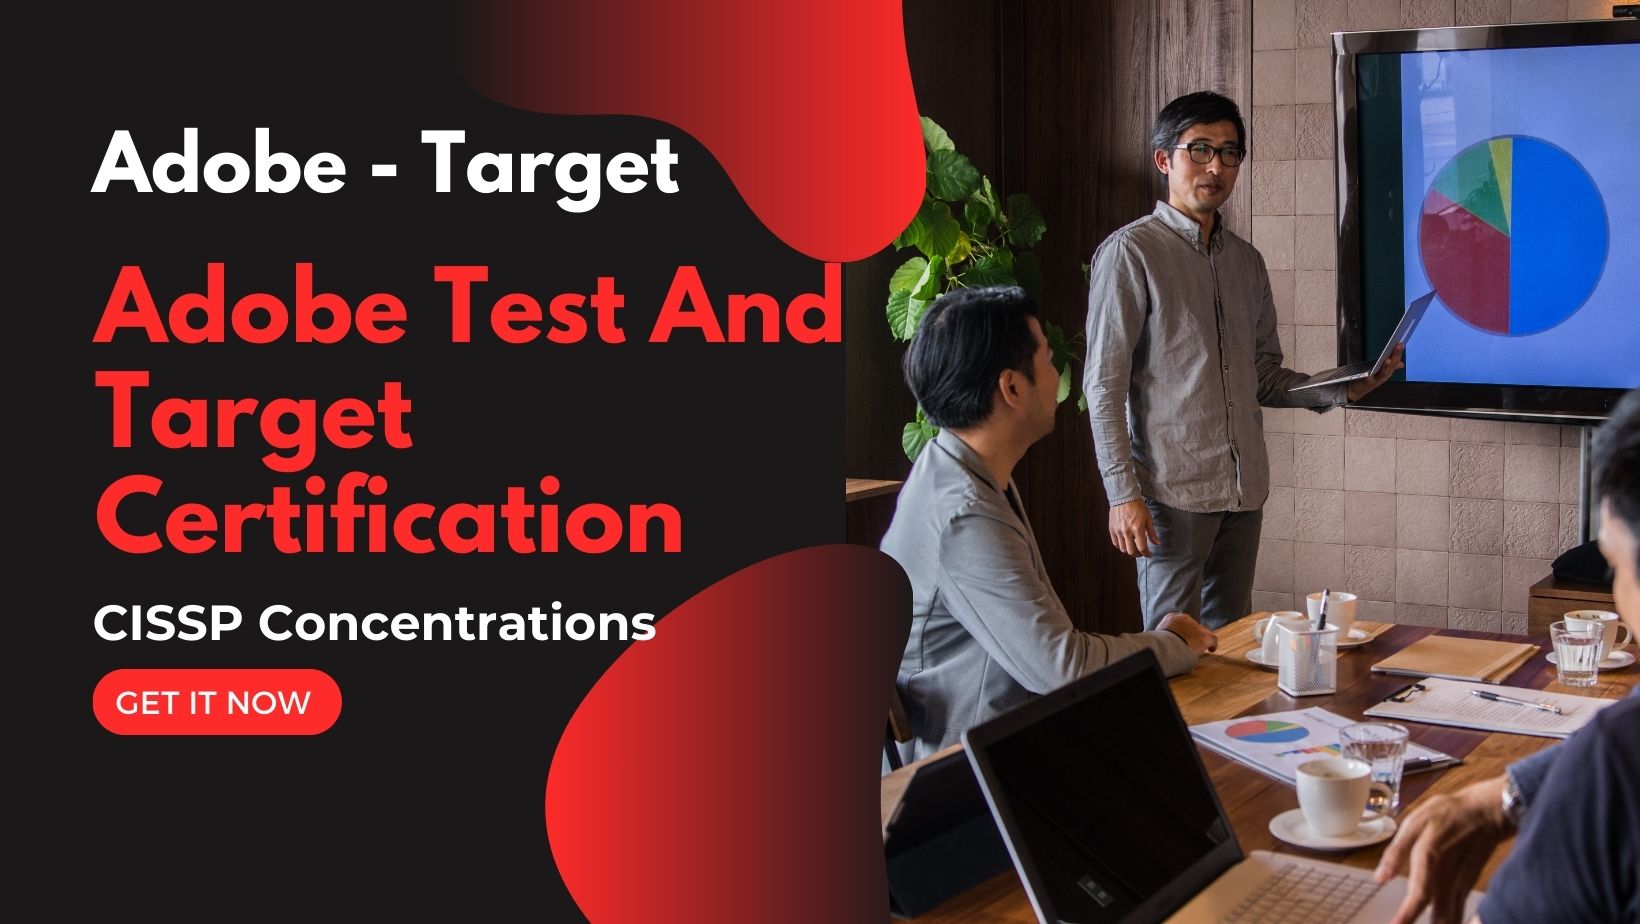 How to Stand Out with Adobe Test And Target Certification on Your Resume